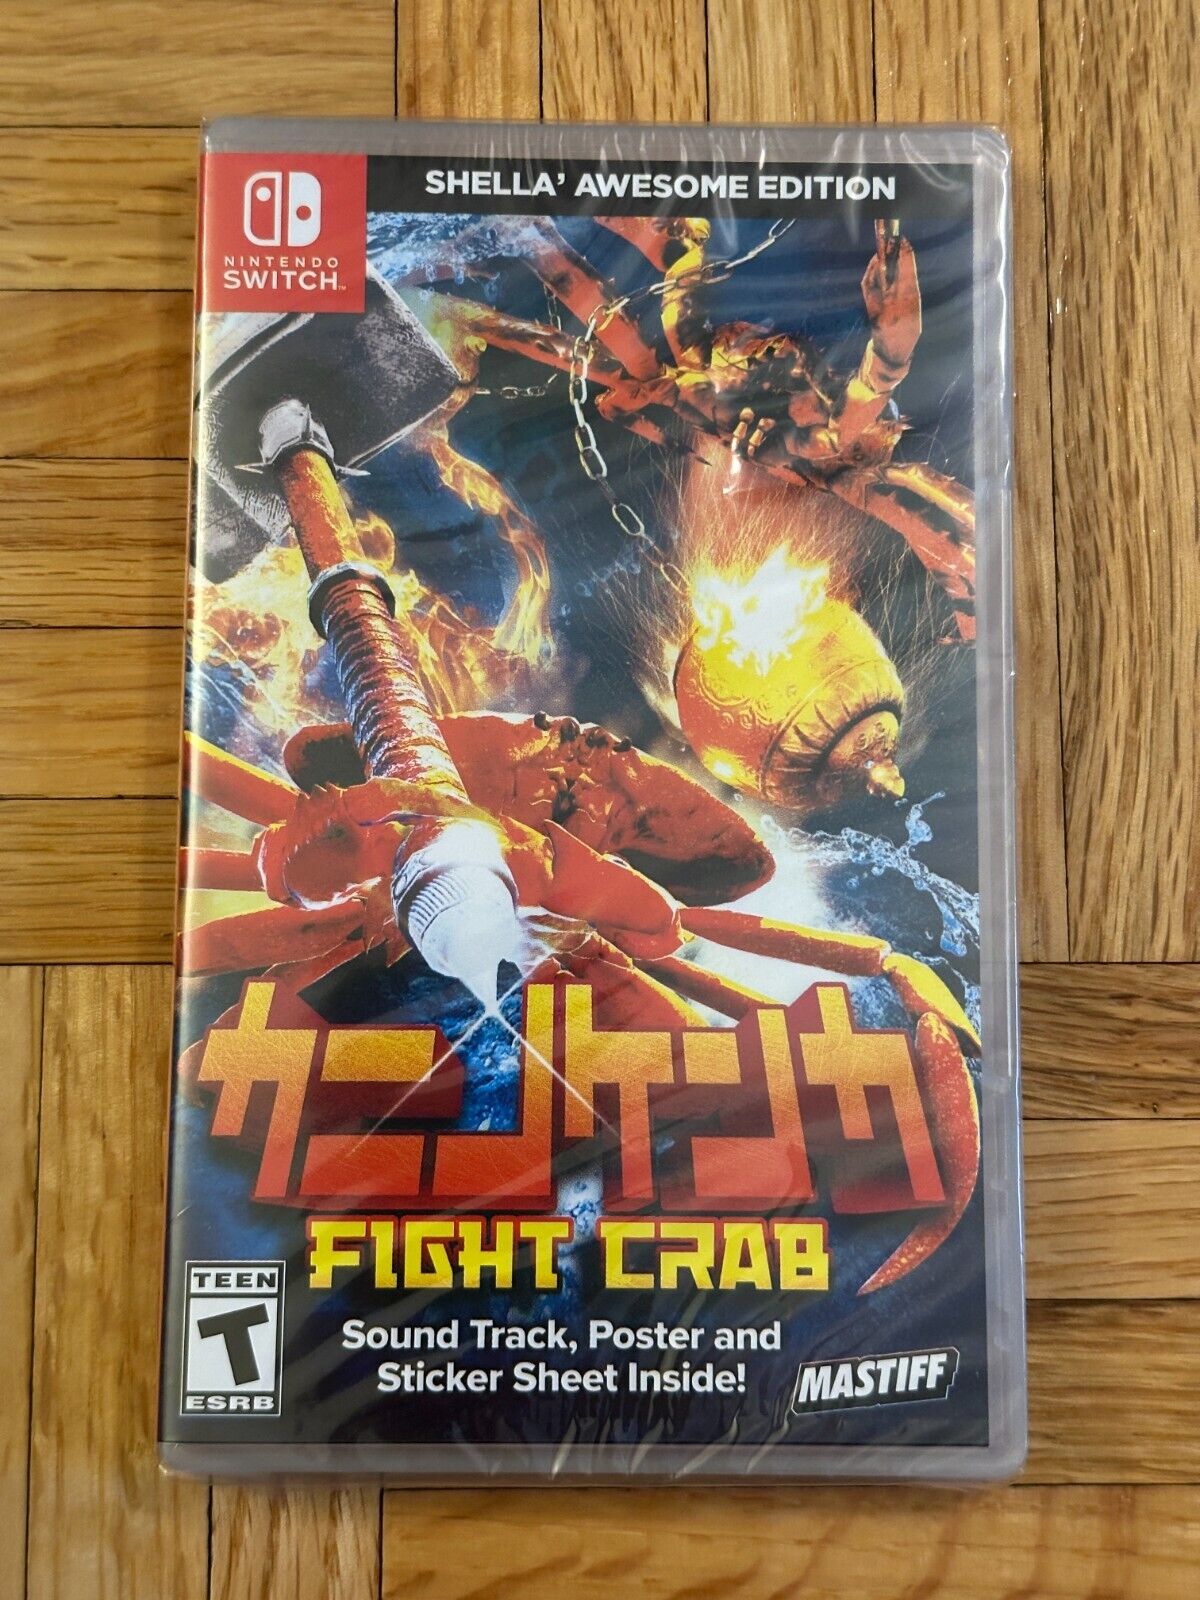 Fight Crab: Shella' Awesome Edition   Nintendo Switch  Sealed Brand New in Box